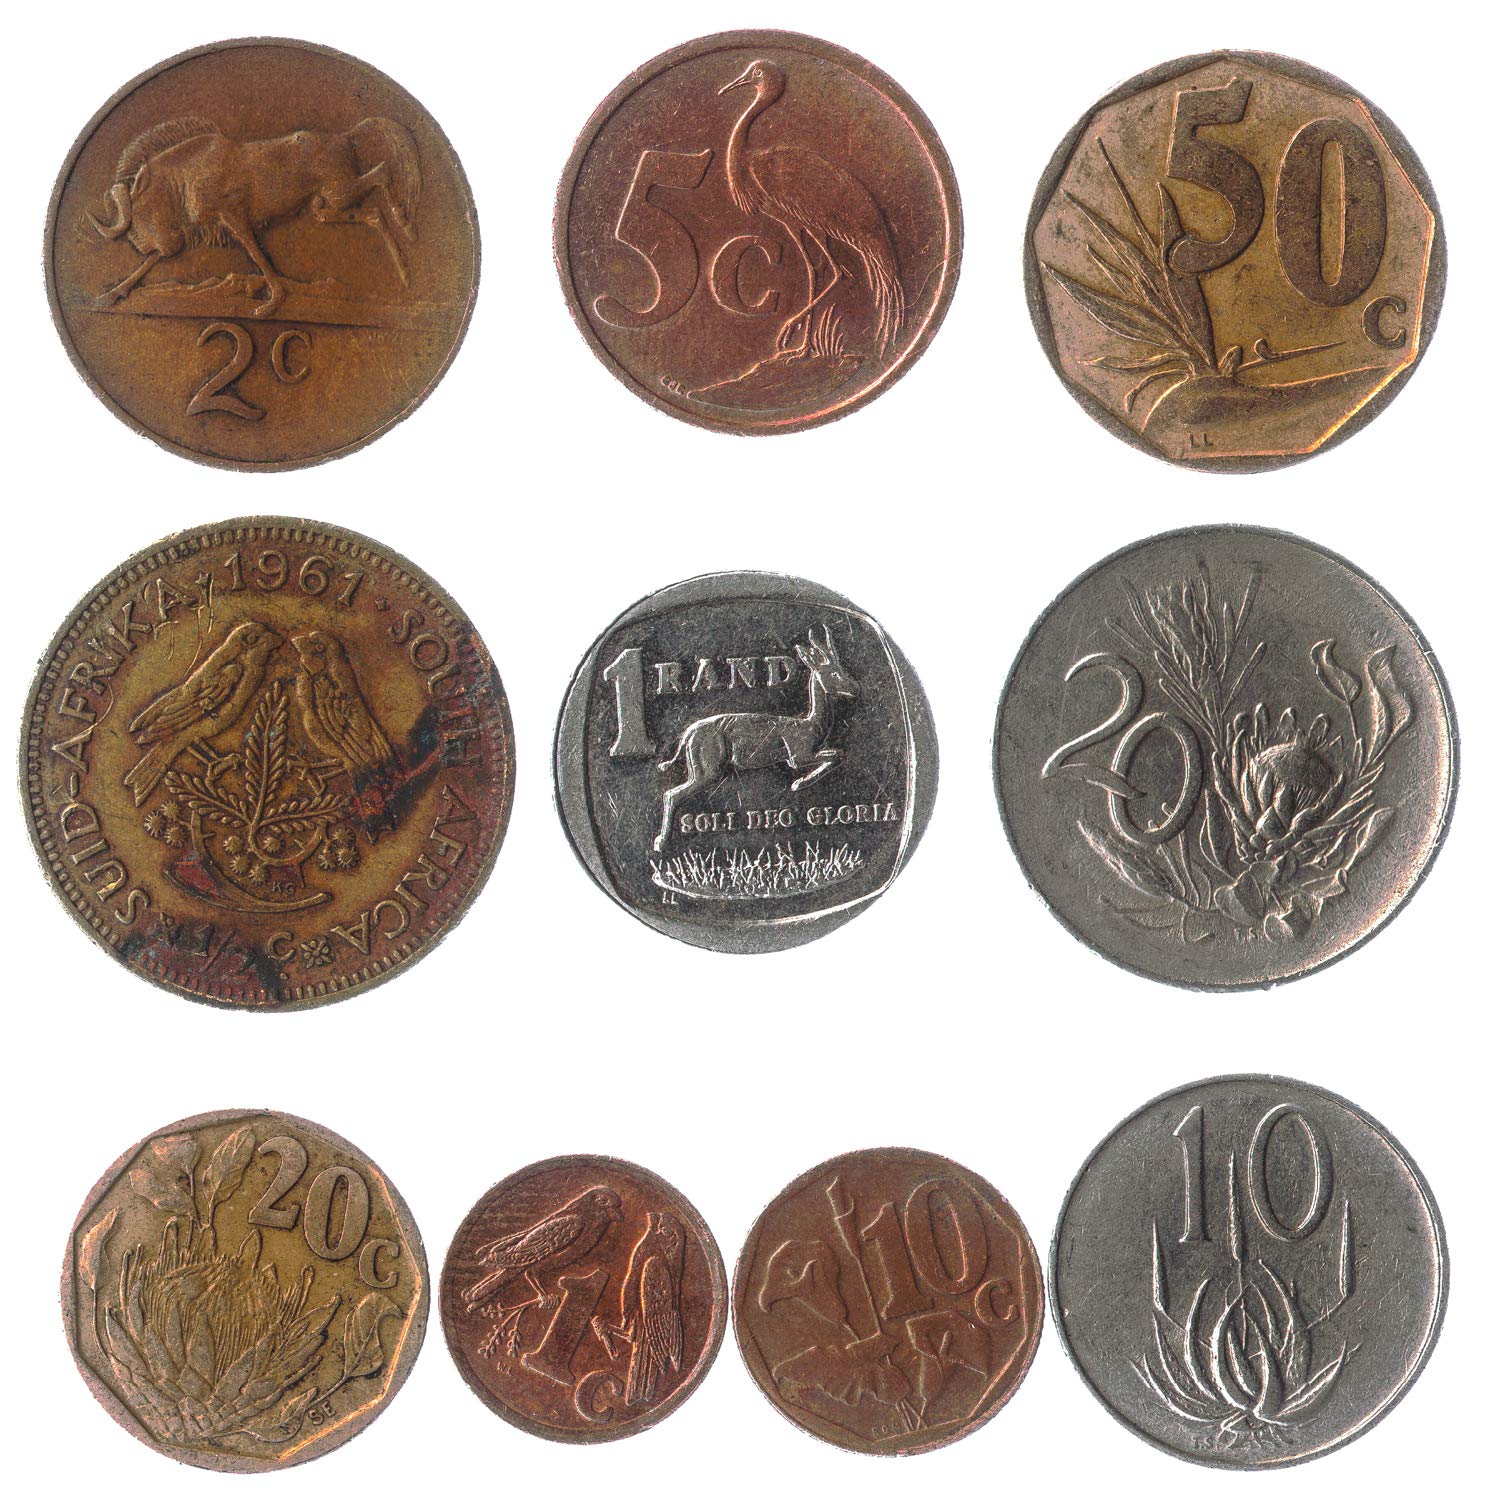 Old Coins and Stamps – The Society of St James